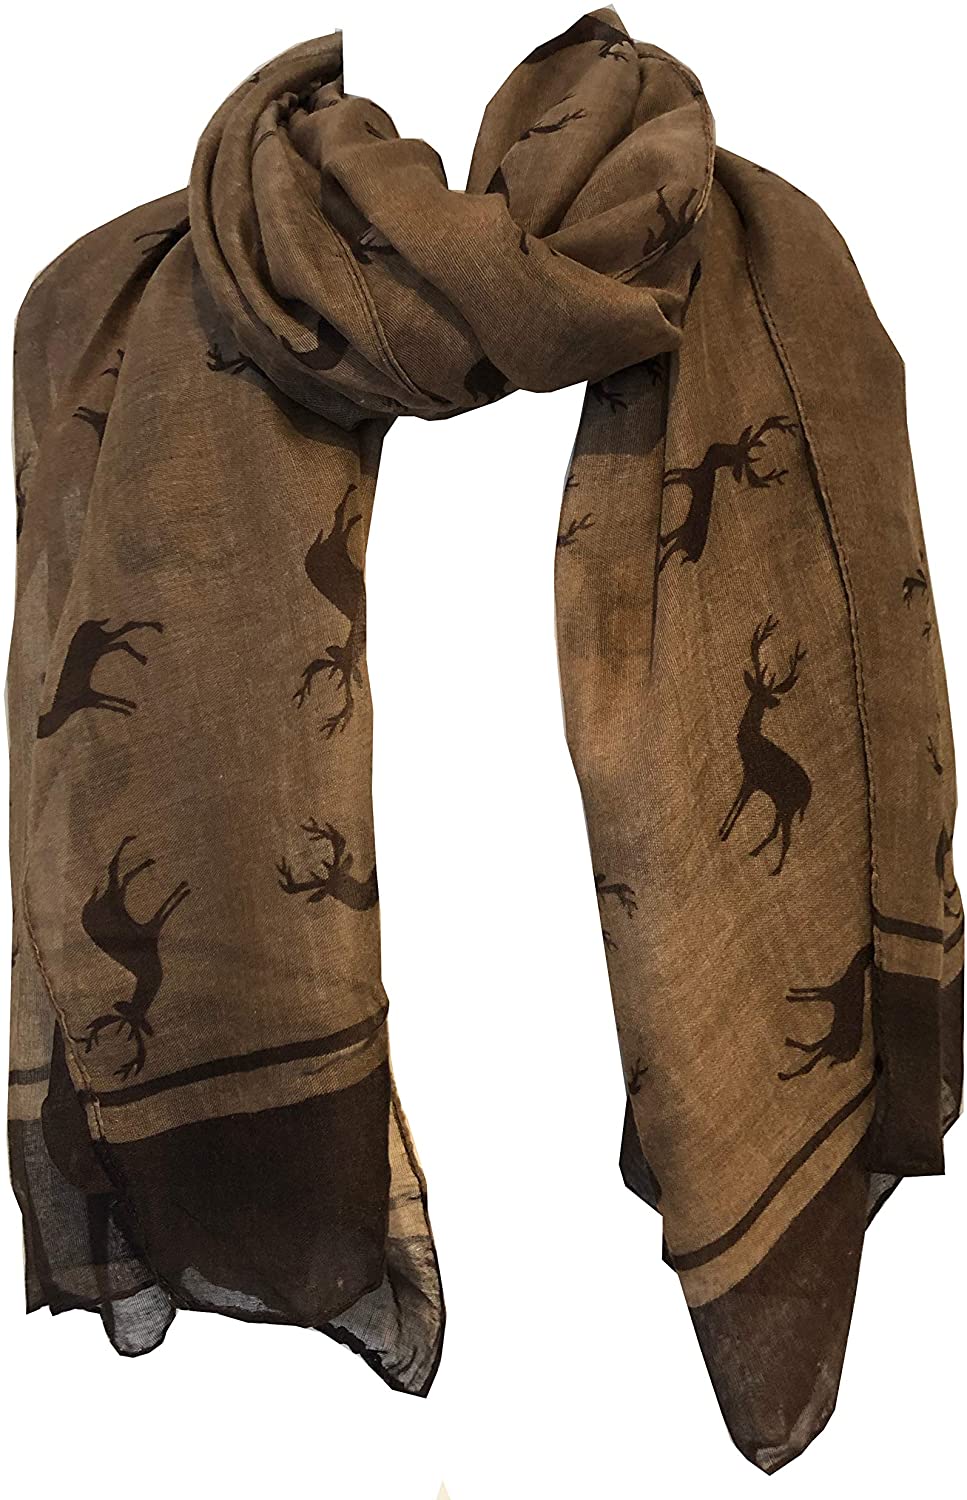 Pamper Yourself Now Brown with Brown Reindeer Design Scarf with Border. Lovely Long Soft Scarf Fantastic Gift